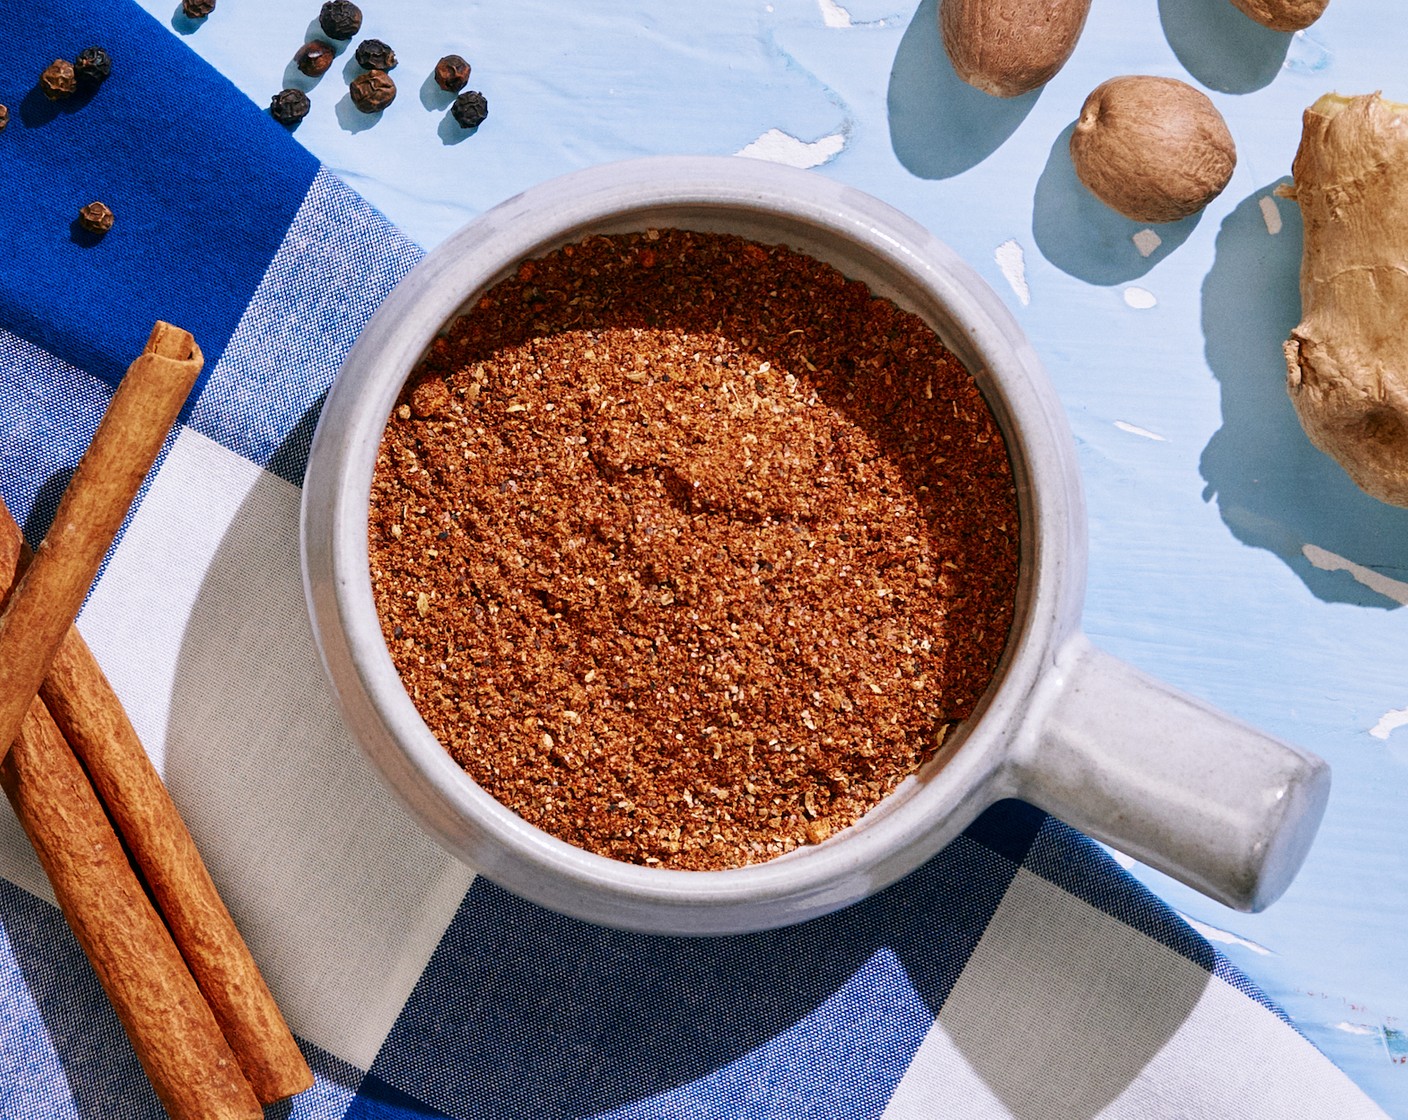 step 1 In a small bowl or jar, add Celery Salt (2 Tbsp), Sweet Paprika (1 1/2 Tbsp), Dry Mustard (1/2 Tbsp), Ground Black Pepper (1/2 Tbsp), Cayenne Pepper (1/2 tsp), Ground Allspice (1/2 tsp), Ground Cinnamon (1/2 tsp), Ground Nutmeg (1/2 tsp), and Ground Ginger (1/2 tsp) and mix until combined. Store in an airtight container.